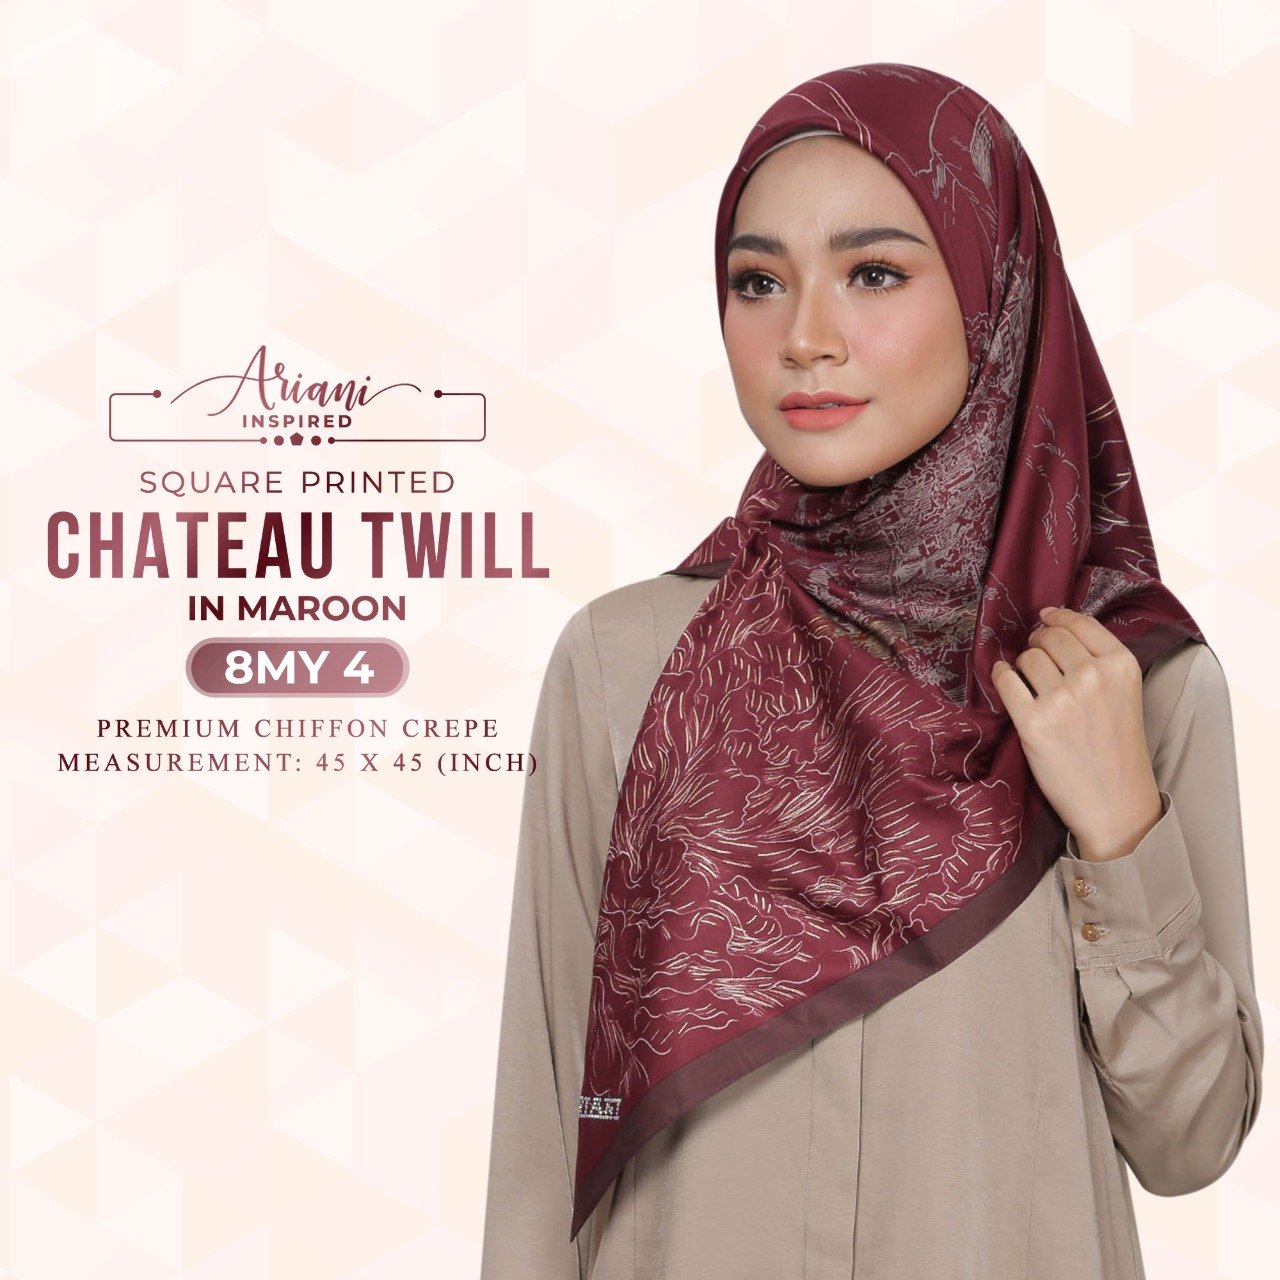 Ariani Printed Chateau Twill SQ Collection